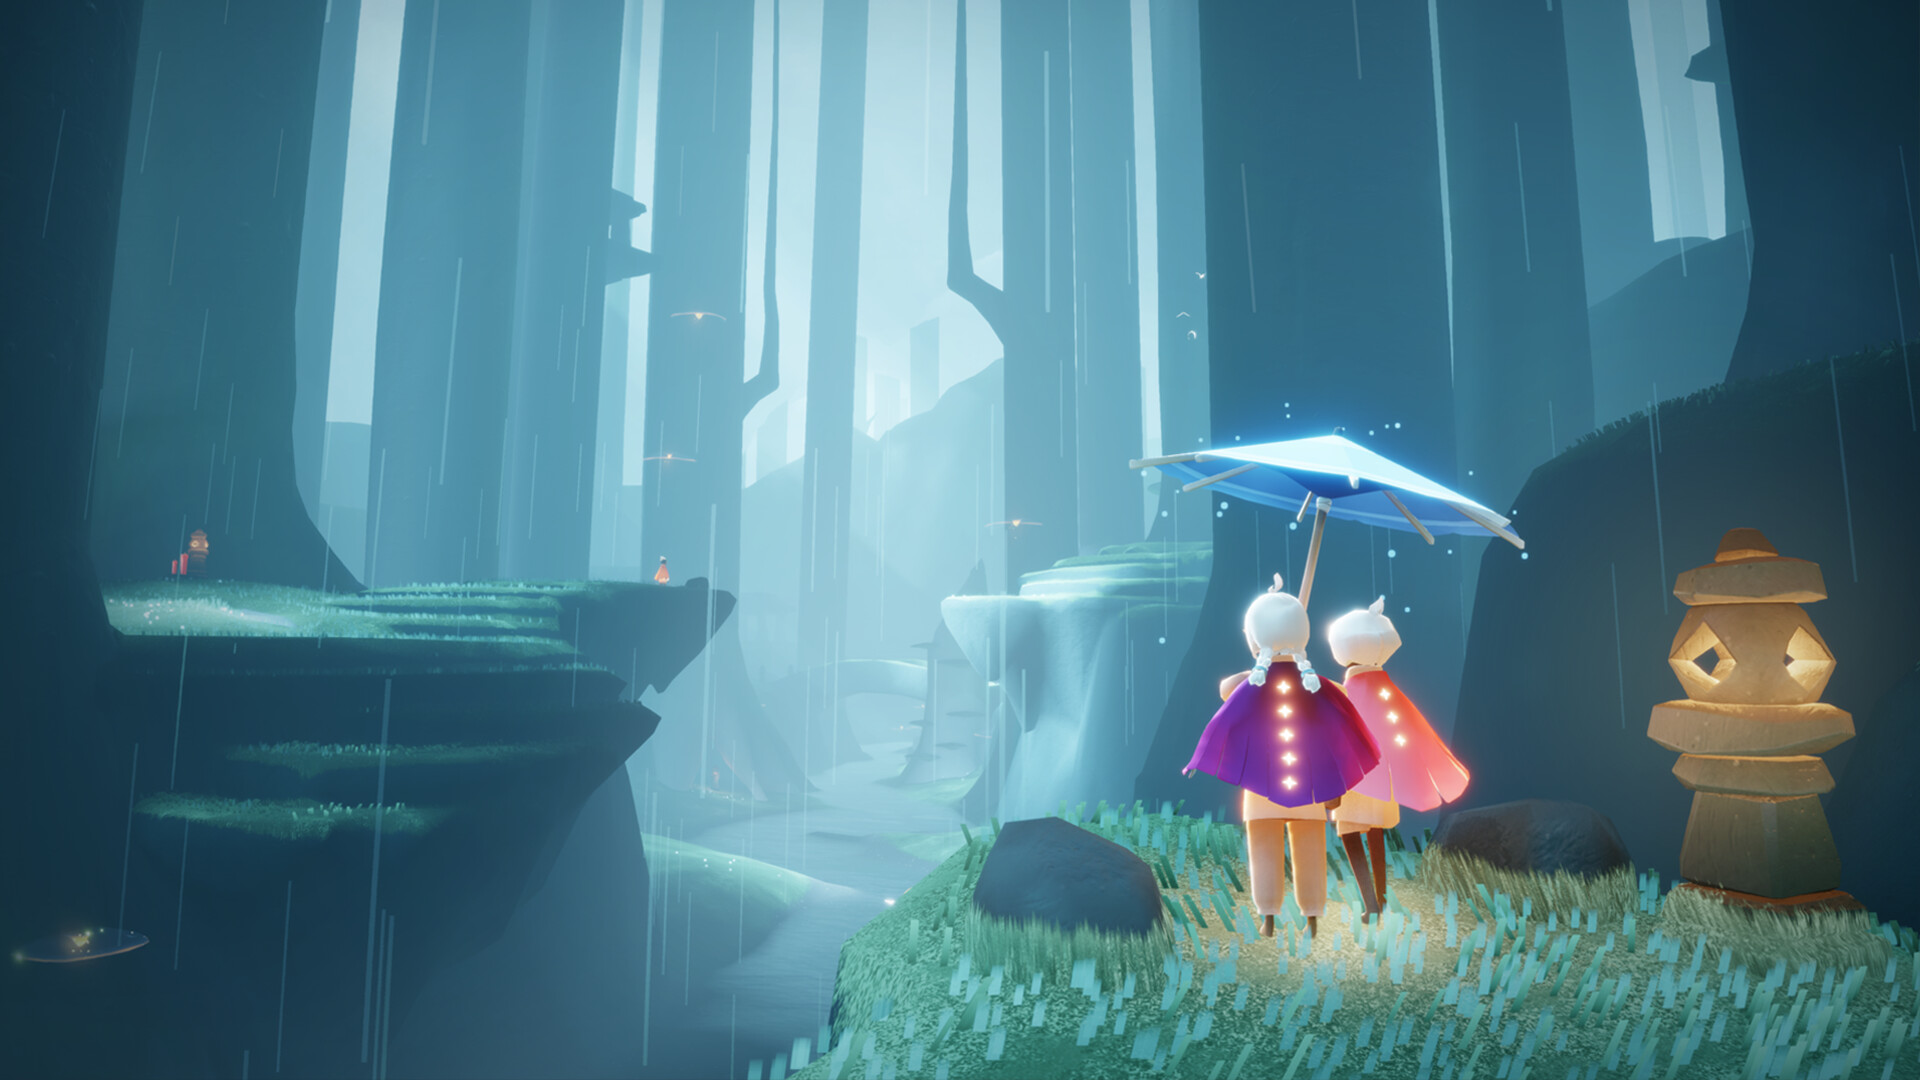 Sky: Children of the Light - two players share an umbrella together in a rainy forest